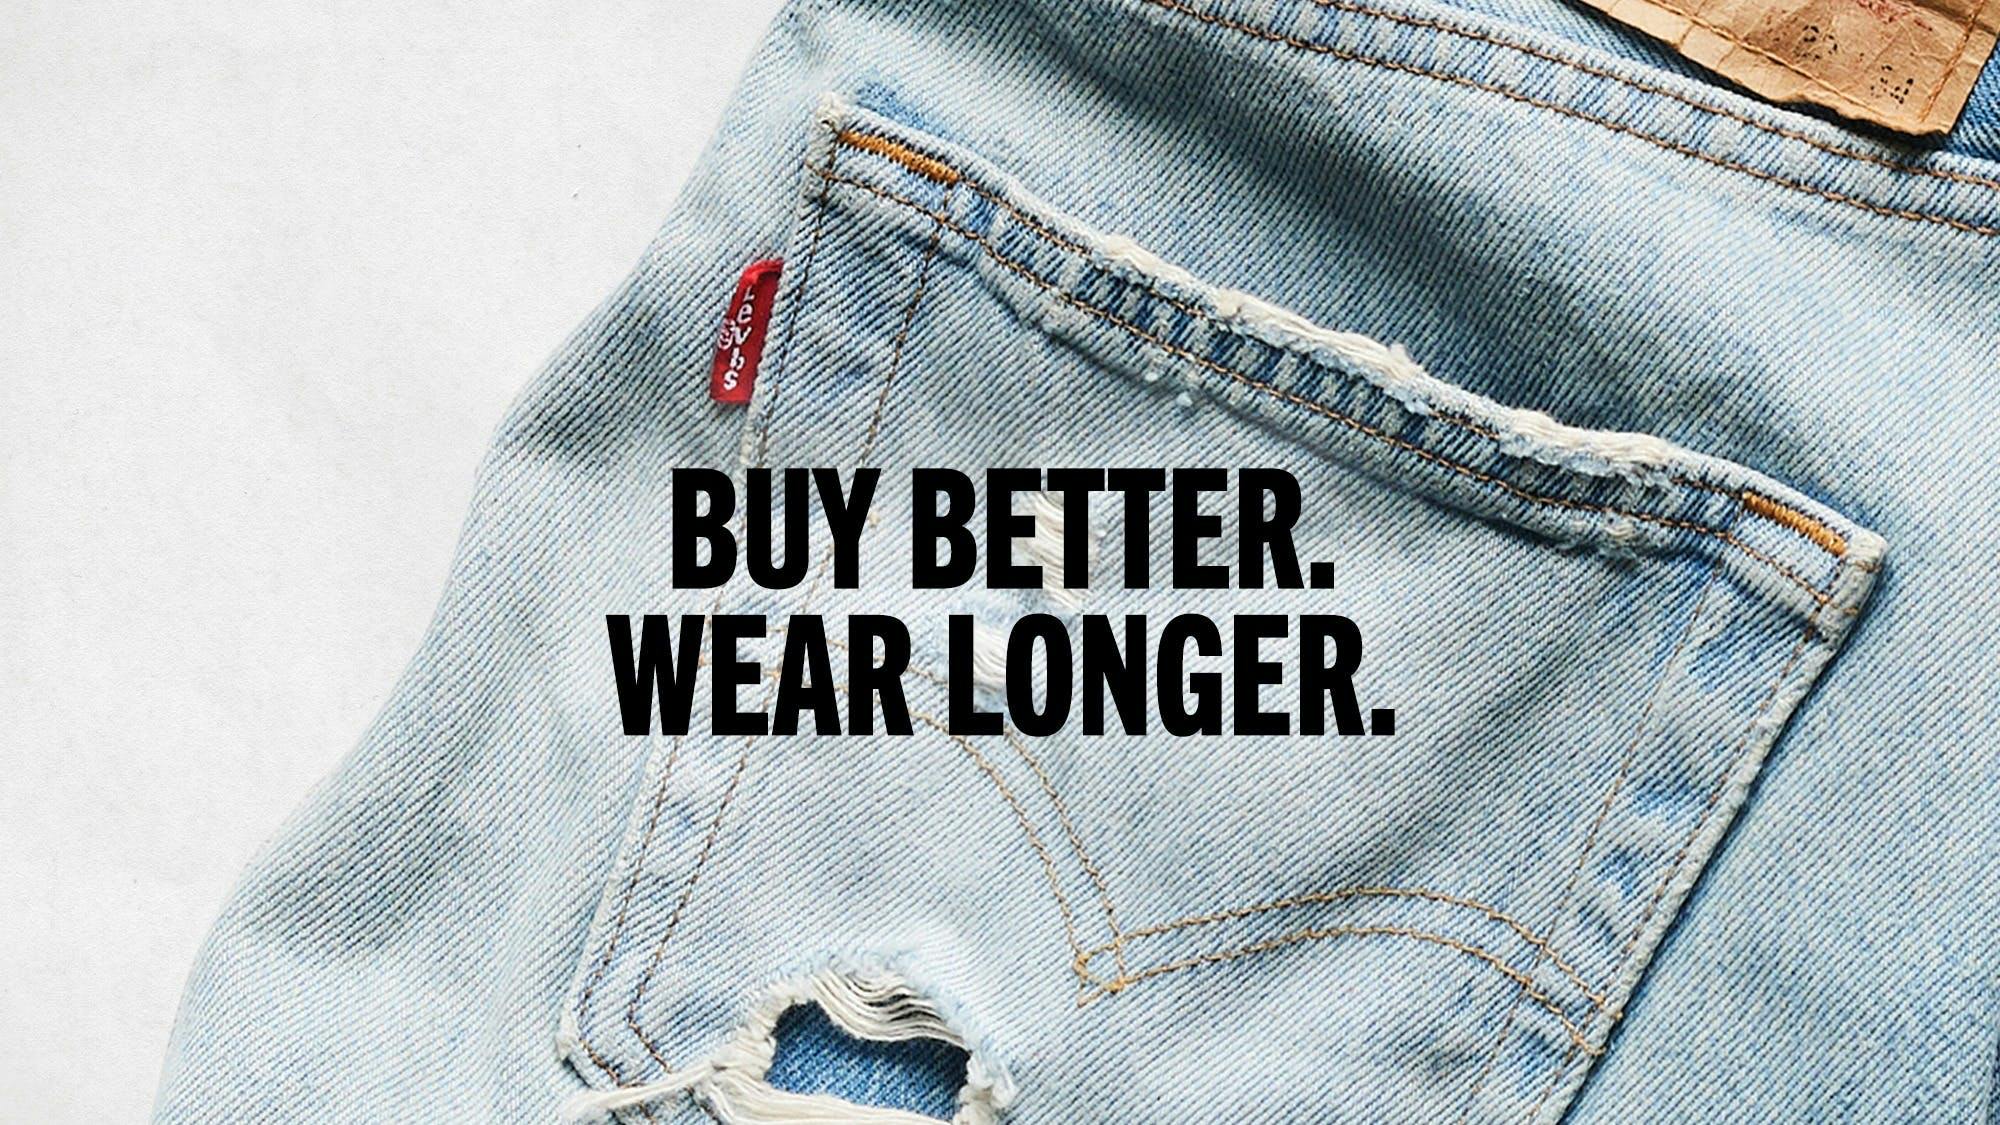 Levi’s Launches ‘Buy Better, Wear Longer’ Sustainability Campaign